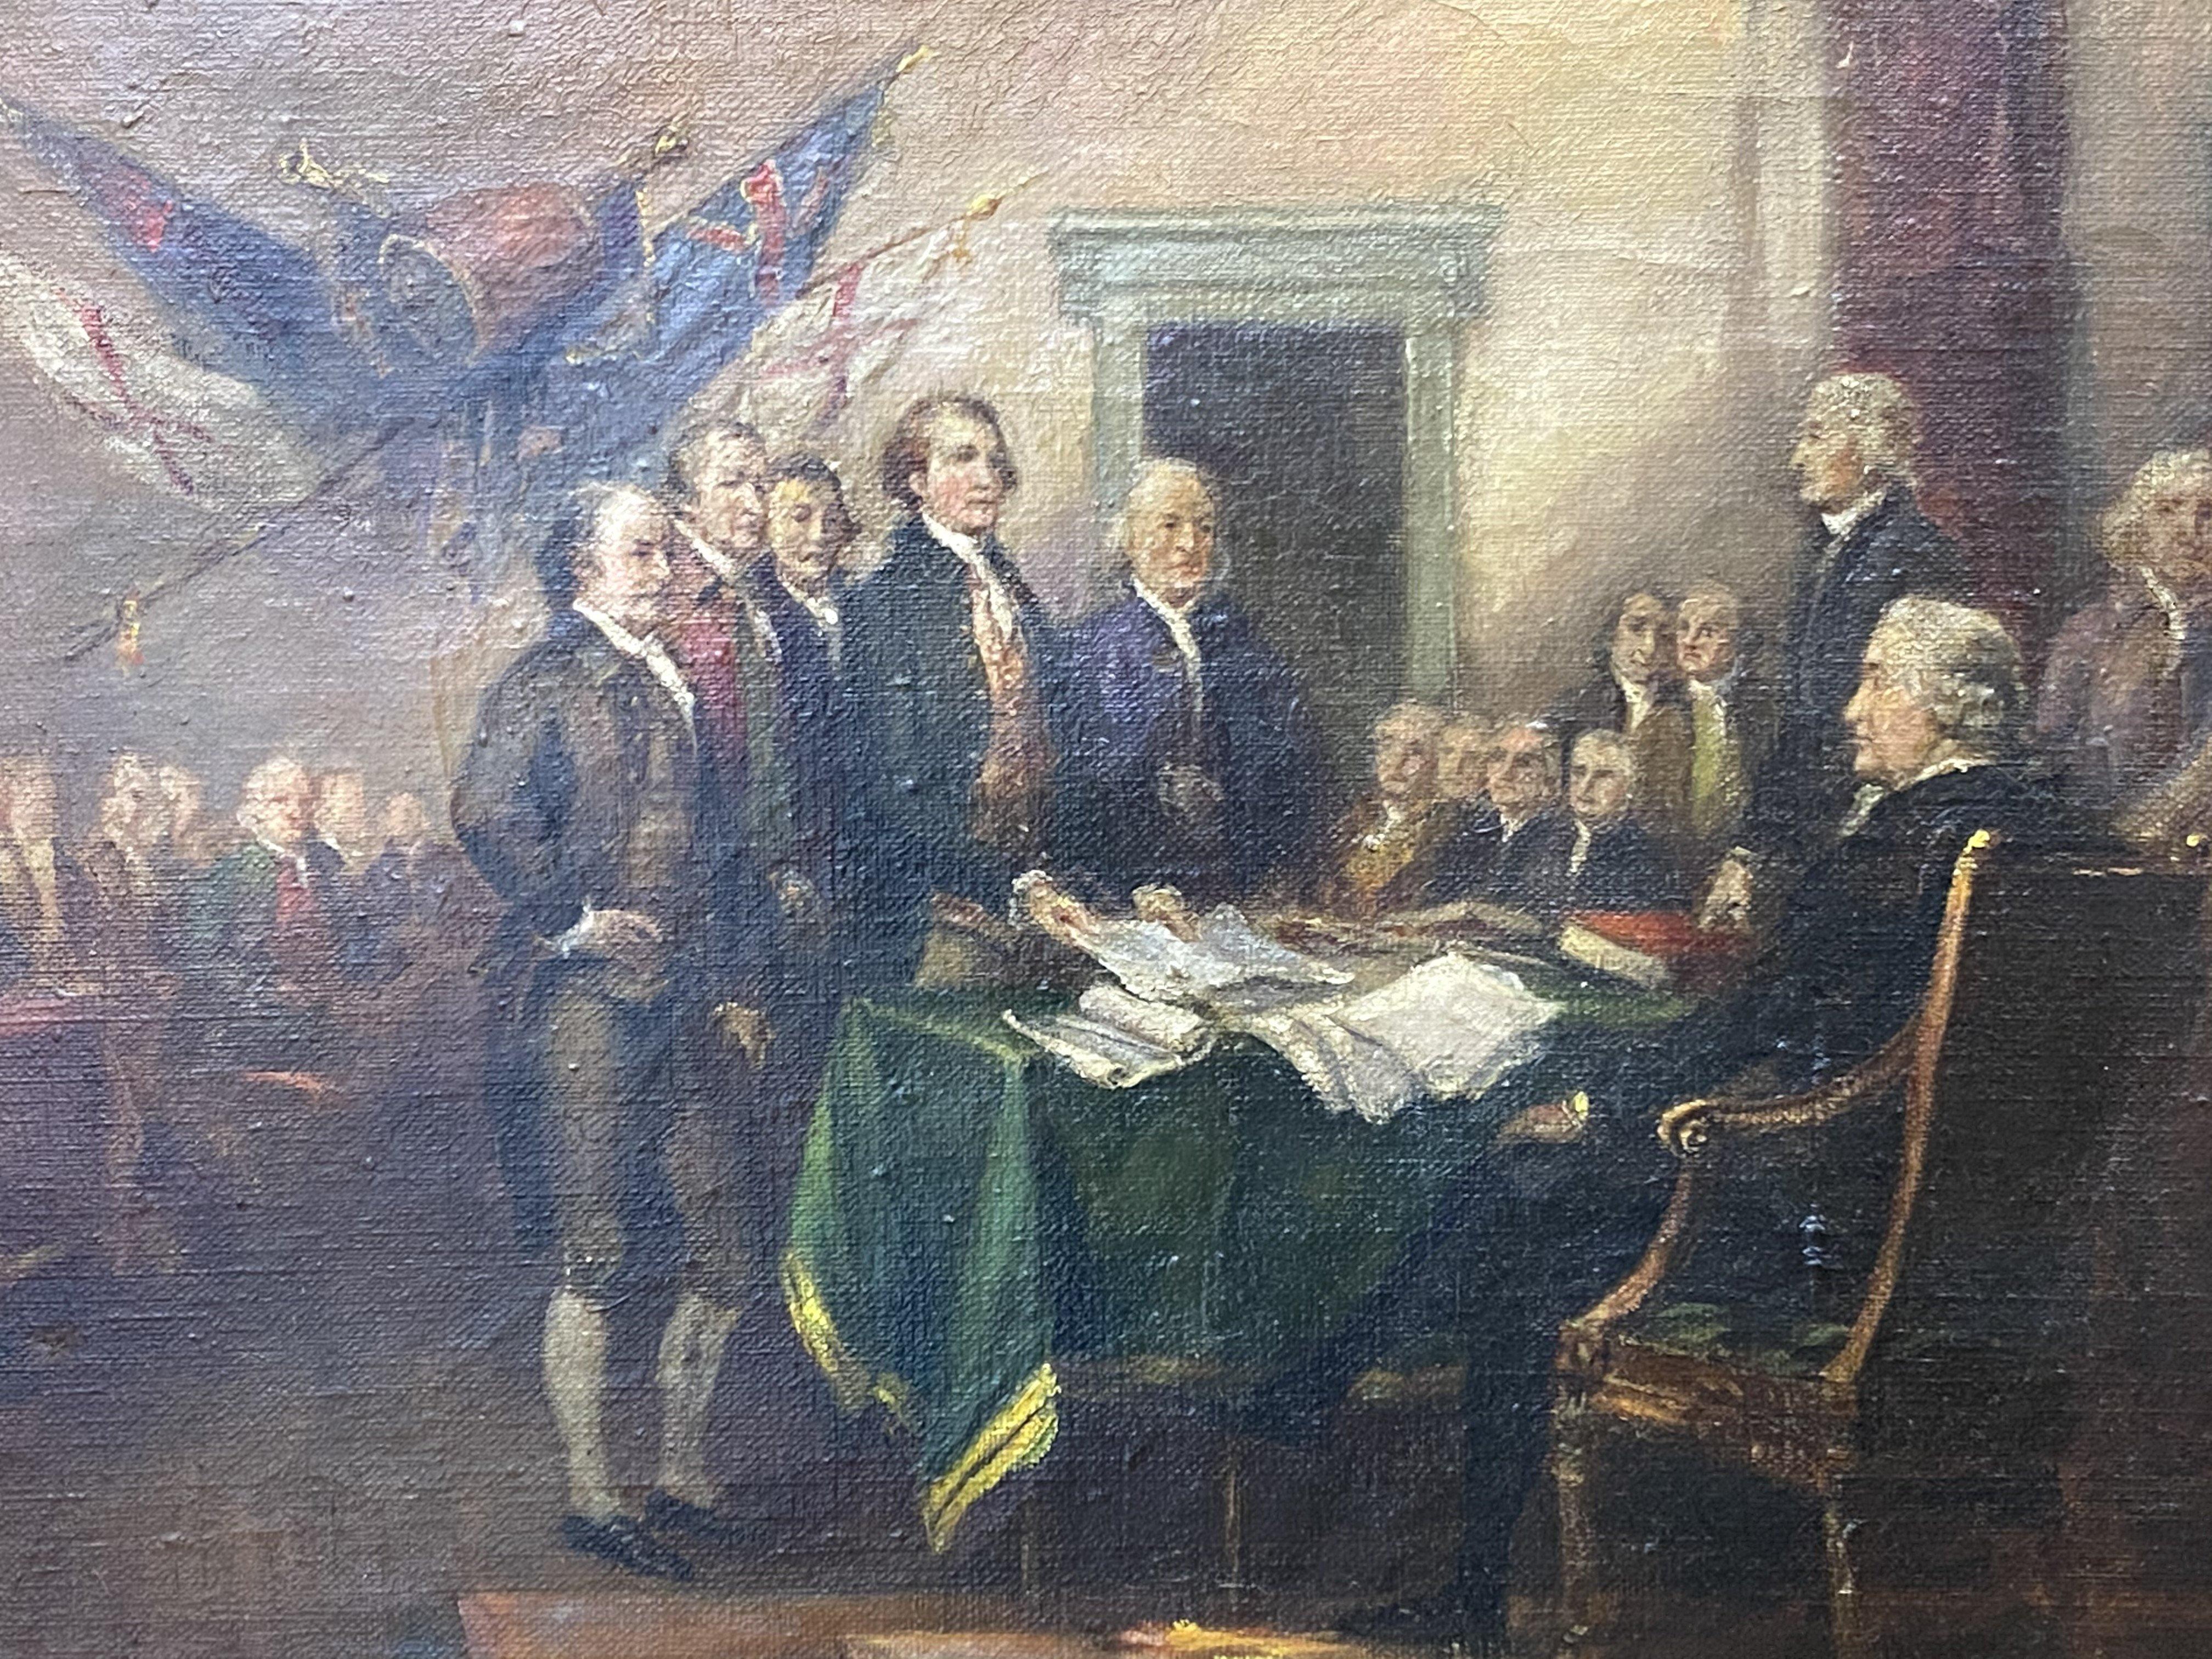 North American Declaration of Independence Oil on Canvas by Horace Carpenter, John Trumbull